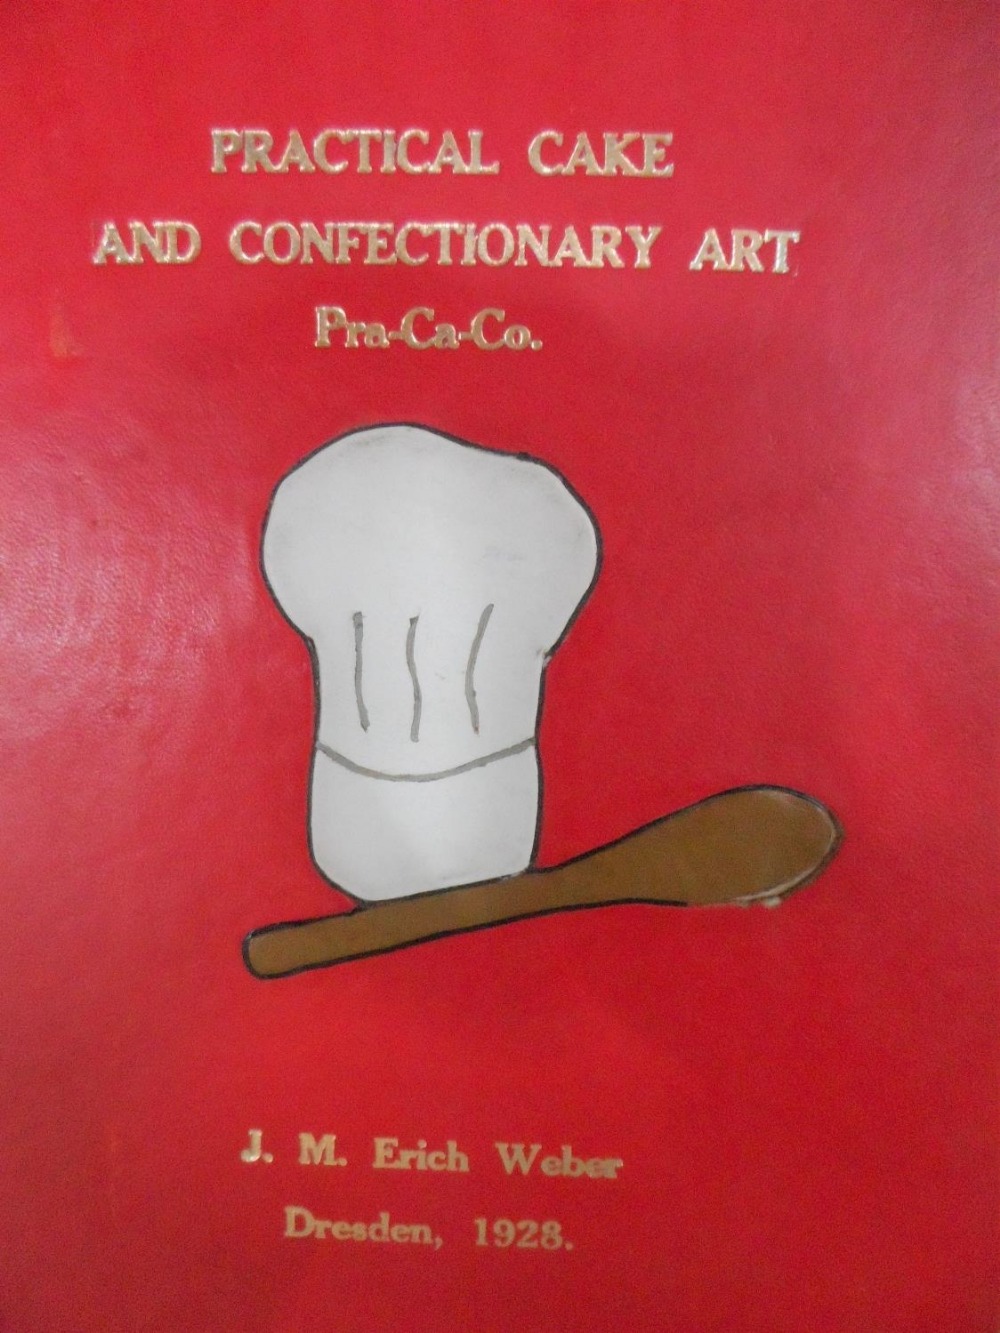 Practical Cake & Confectionary Art by J M Erich, 1928 edition with one-off specially made hand bound - Image 2 of 11